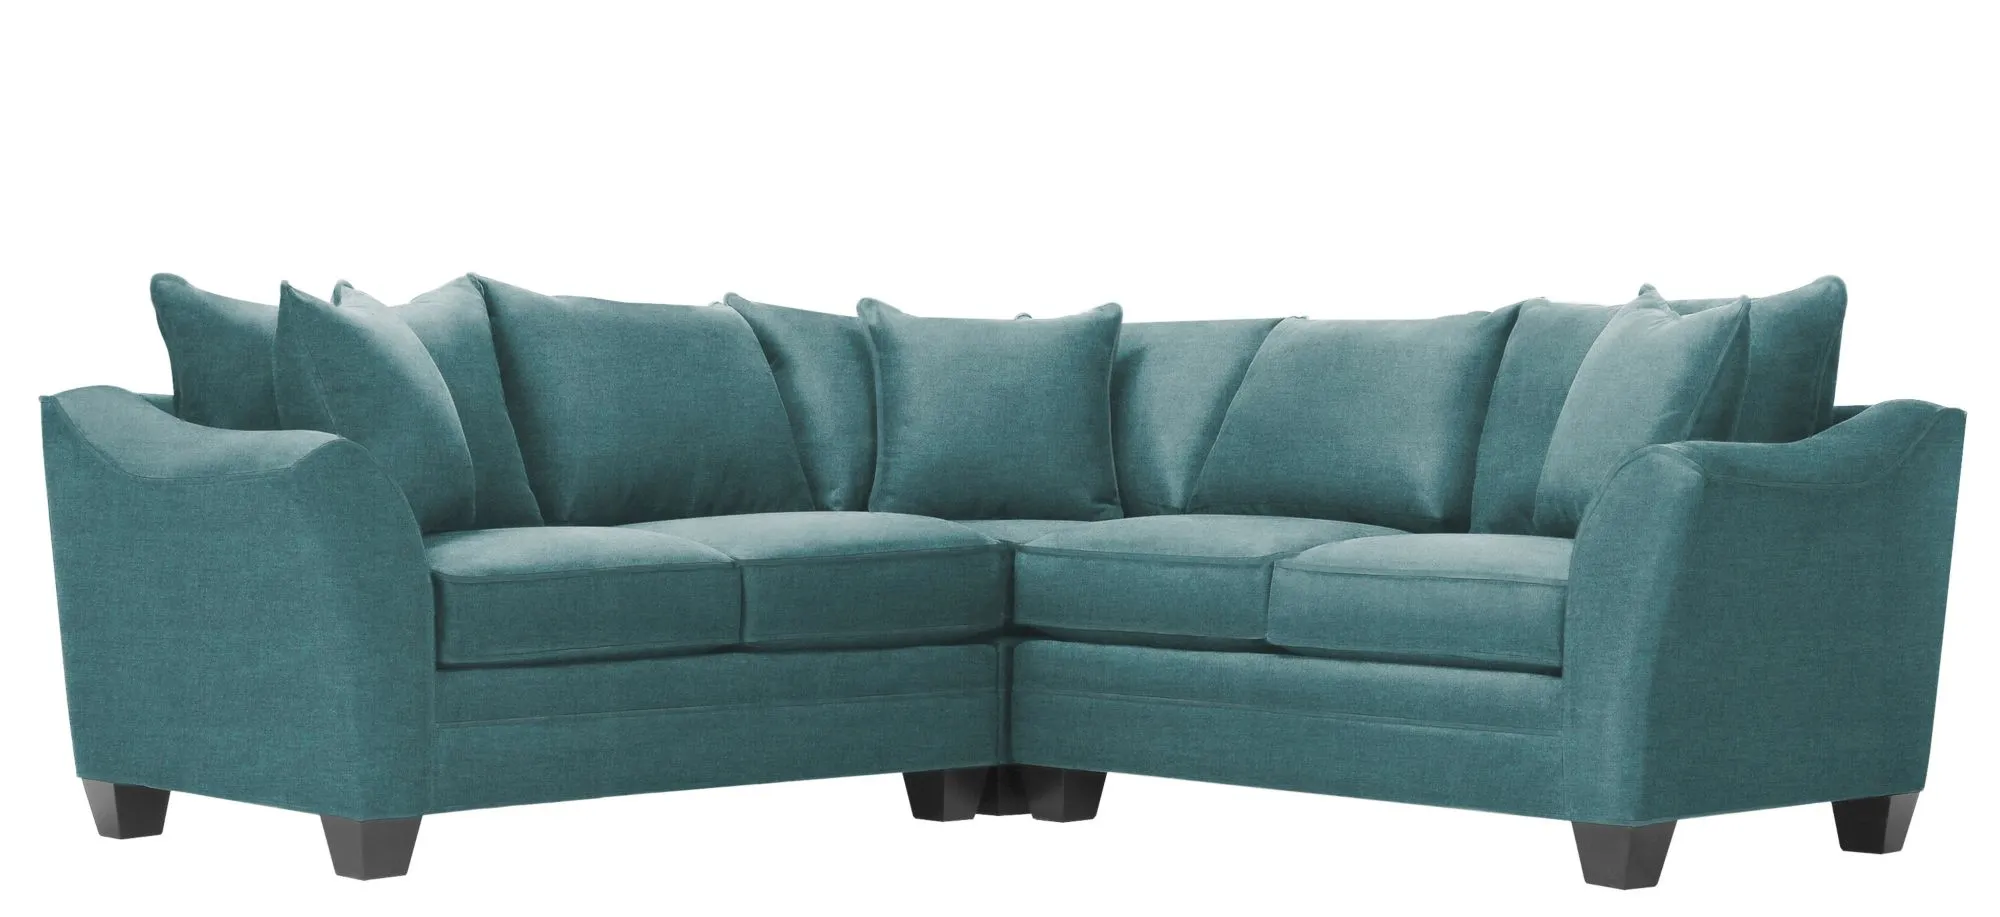 Foresthill 3-pc. Symmetrical Loveseat Sectional Sofa in Santa Rosa Turquoise by H.M. Richards